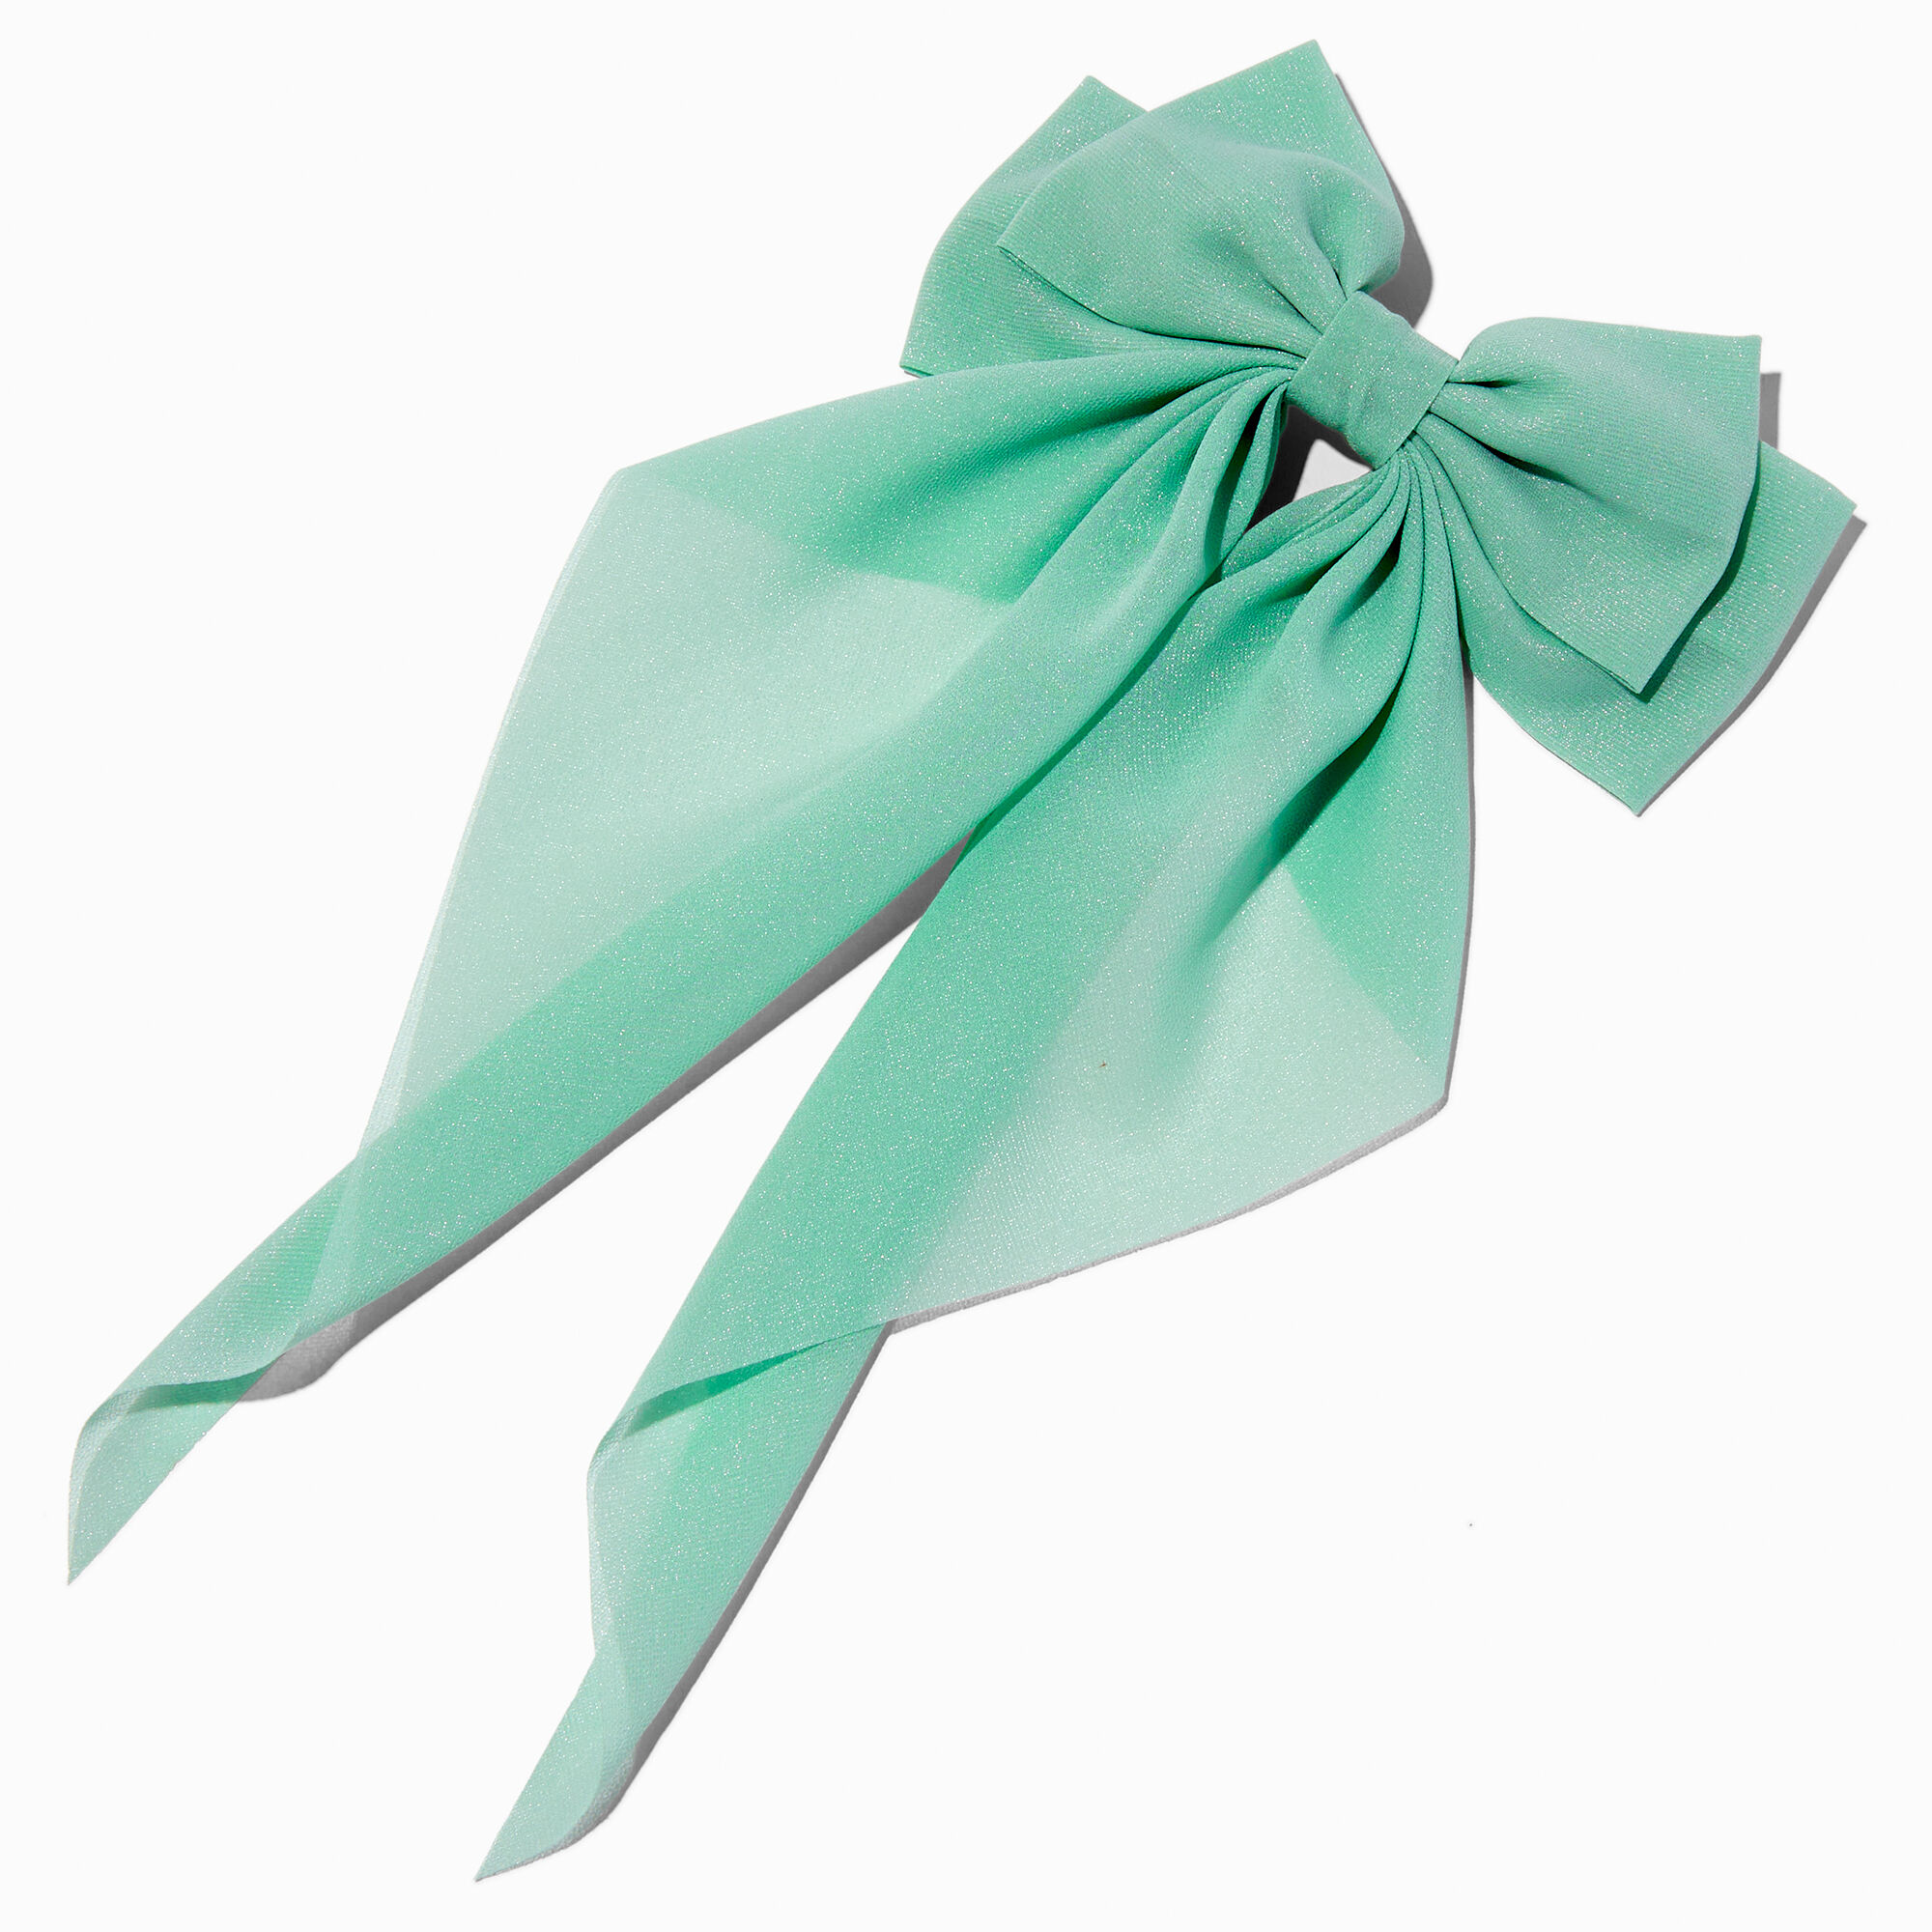 View Claires Mint Long Tail Bow Hair Clip Green information